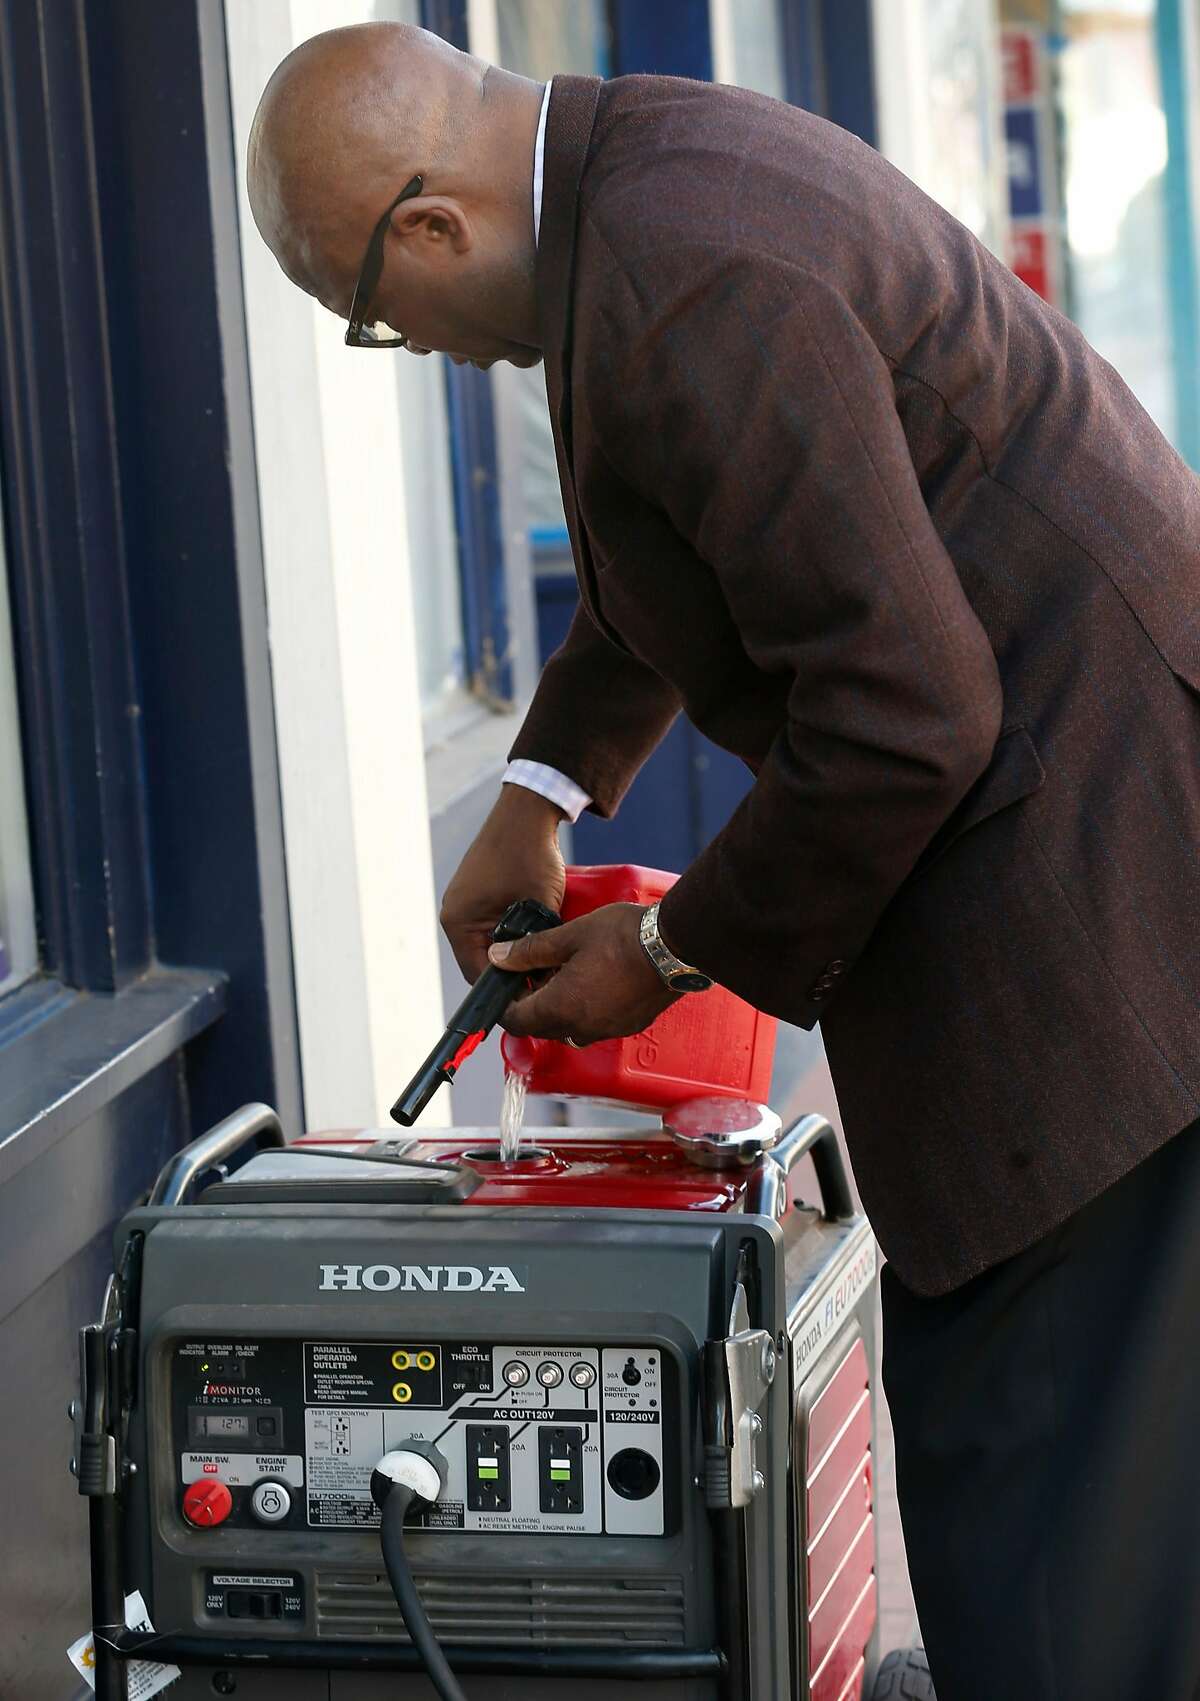 Capital City Pharmacy owner Arthur Metu fills a rented portable generator with gasoline on Georgia Street as the public safety power shutoff issued by PG&E continues for a third consecutive day in Vallejo, Calif. on Tuesday, Oct. 29, 2019. Metu had to drive all the way to Livermore to pick up the generator, the closest location he could find.